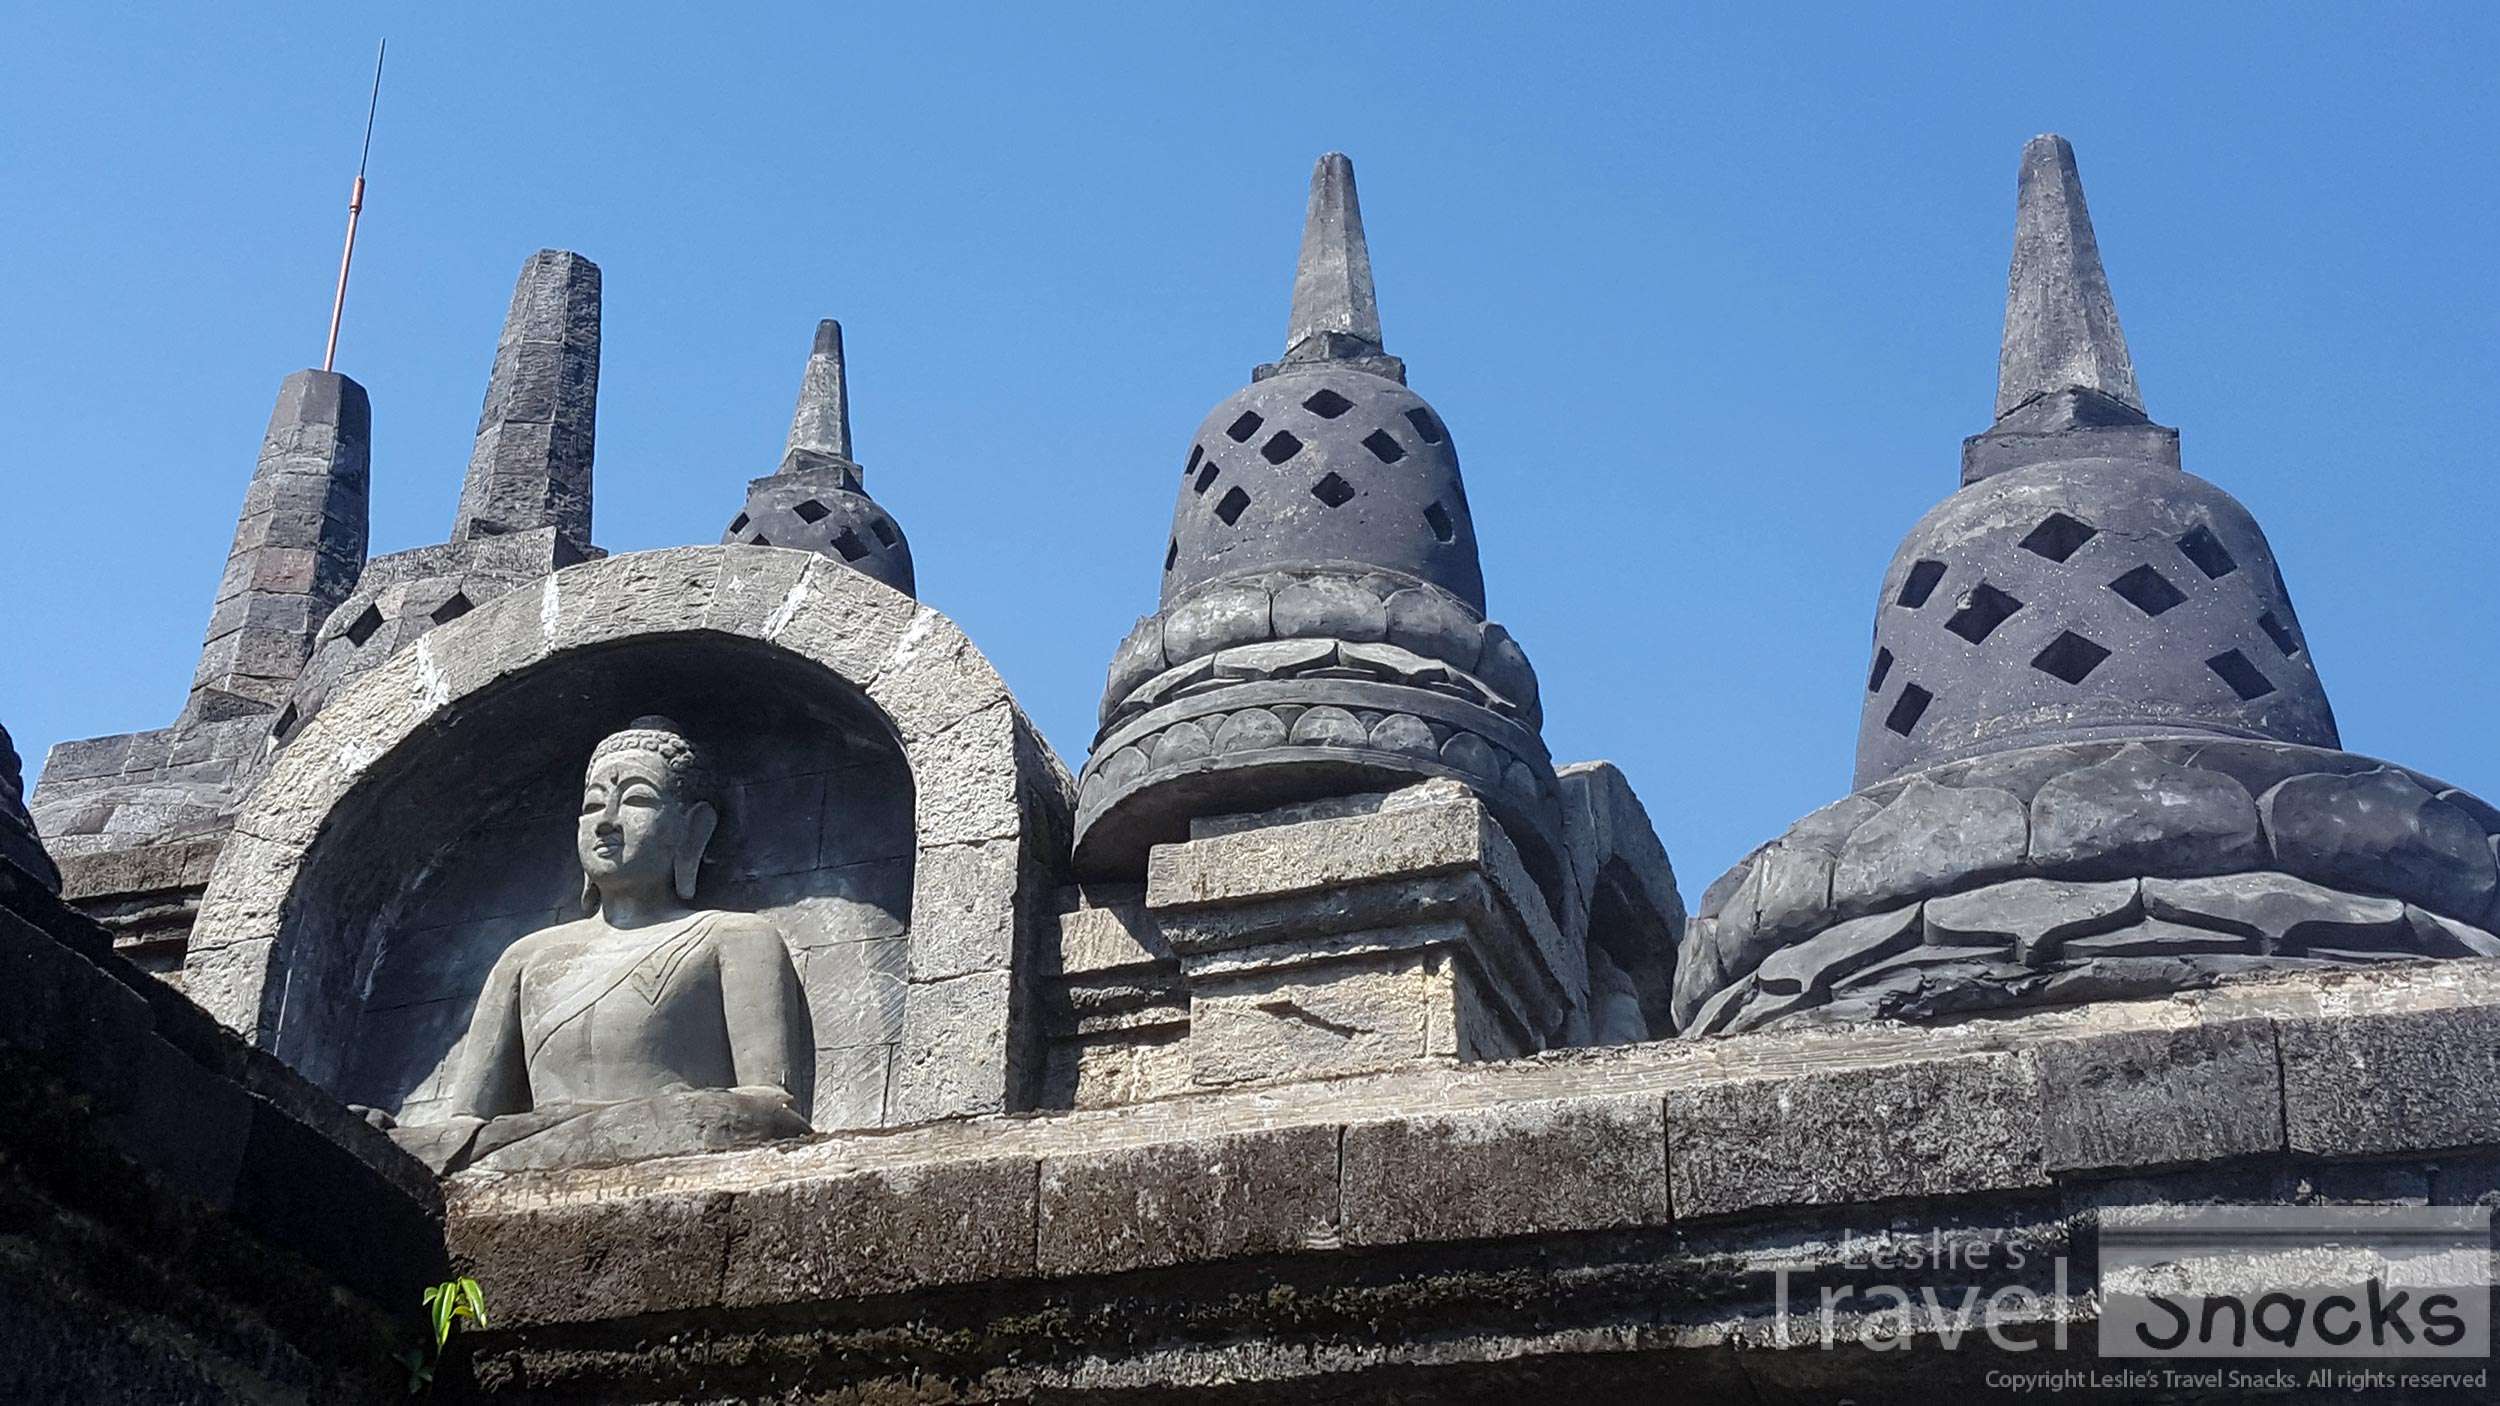 I've been to Borobudur (18 years ago!) and this is easily recognizable as a replica.